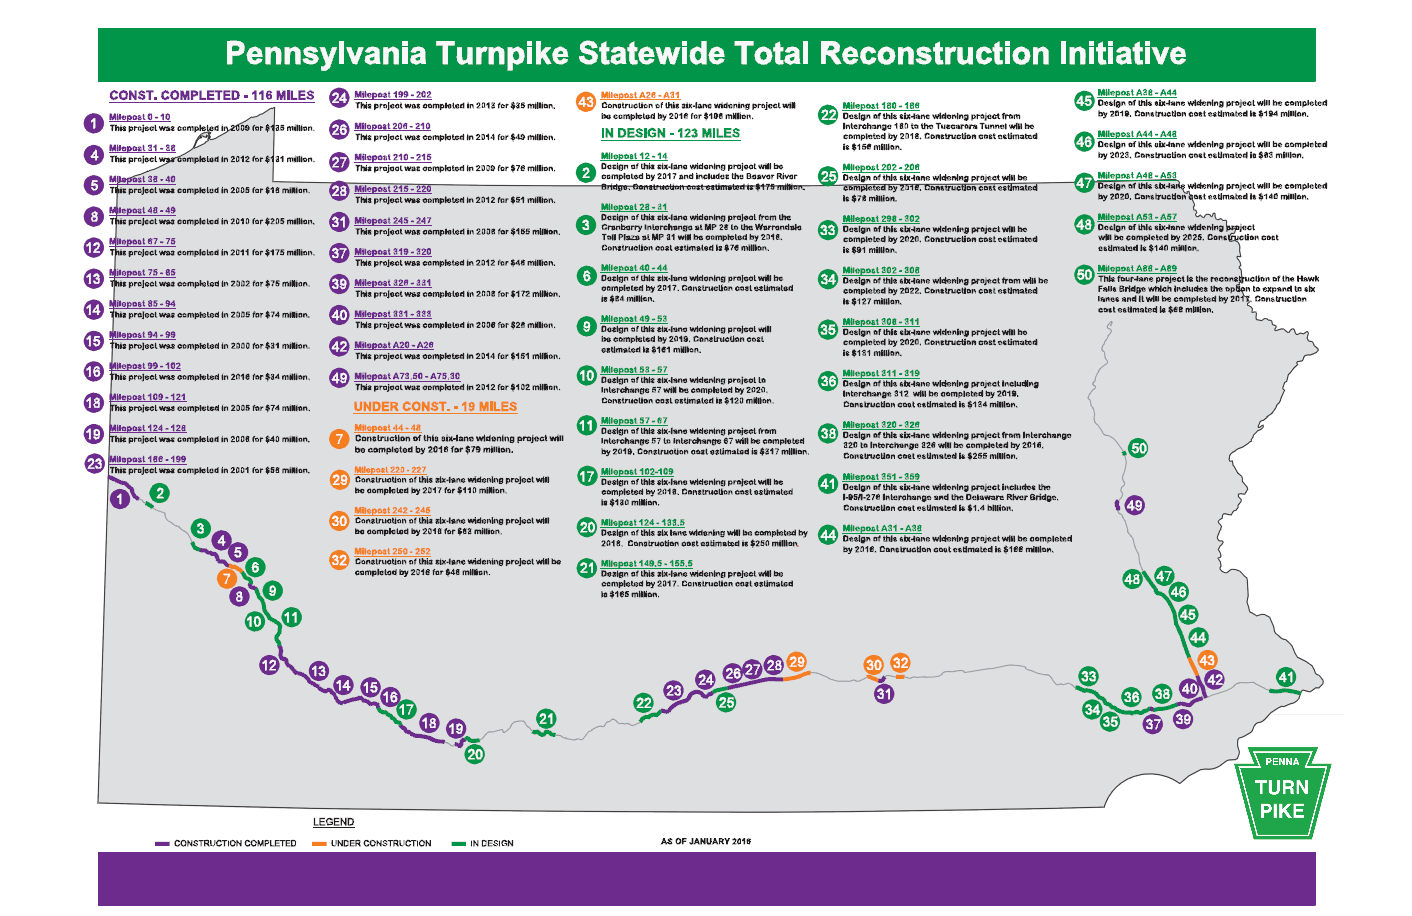 Statewide Total Reconstruction